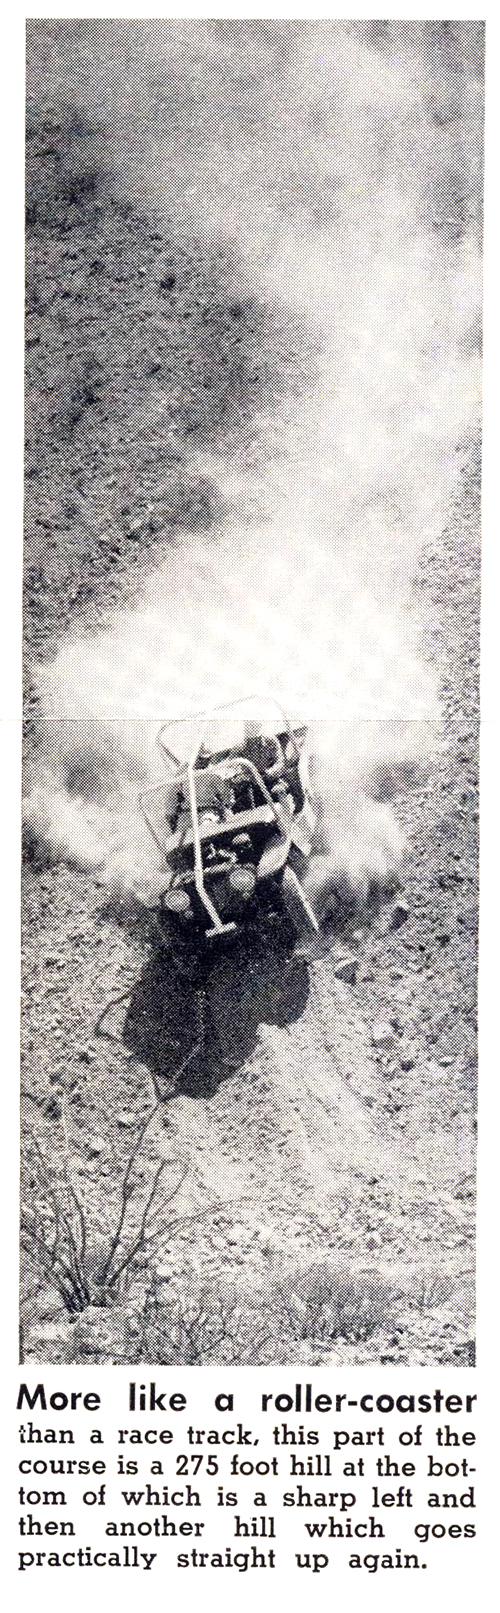 1957-05-willys-news-rodeo-nm-race-photo5